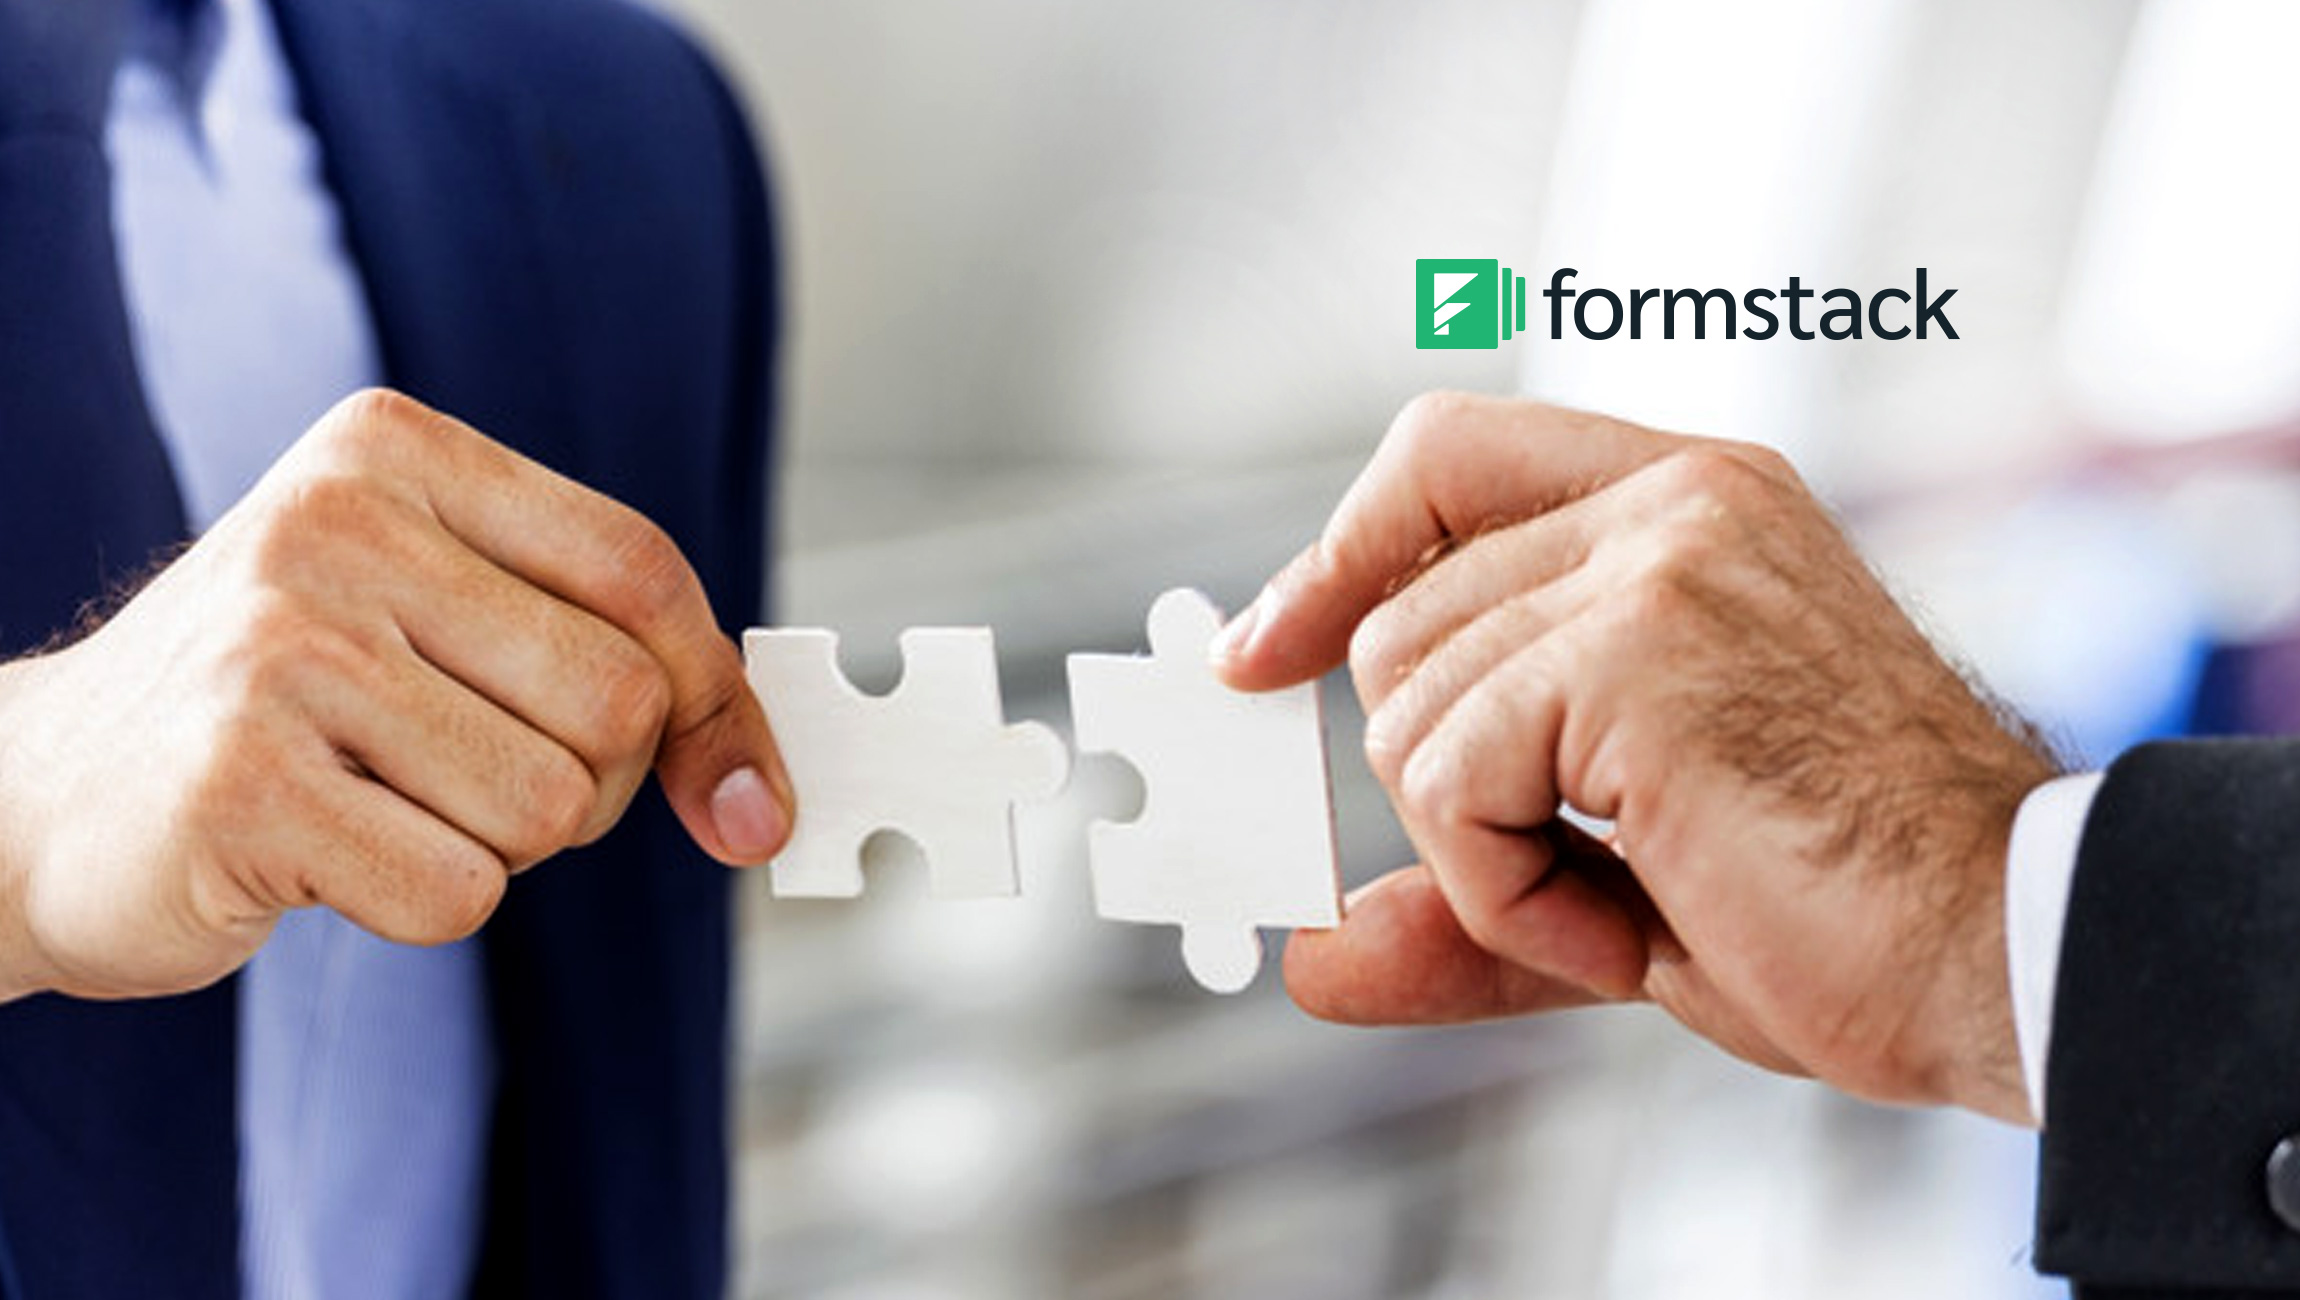 Formstack Acquires WebMerge, Enhances Document Creation and Automation Capabilities